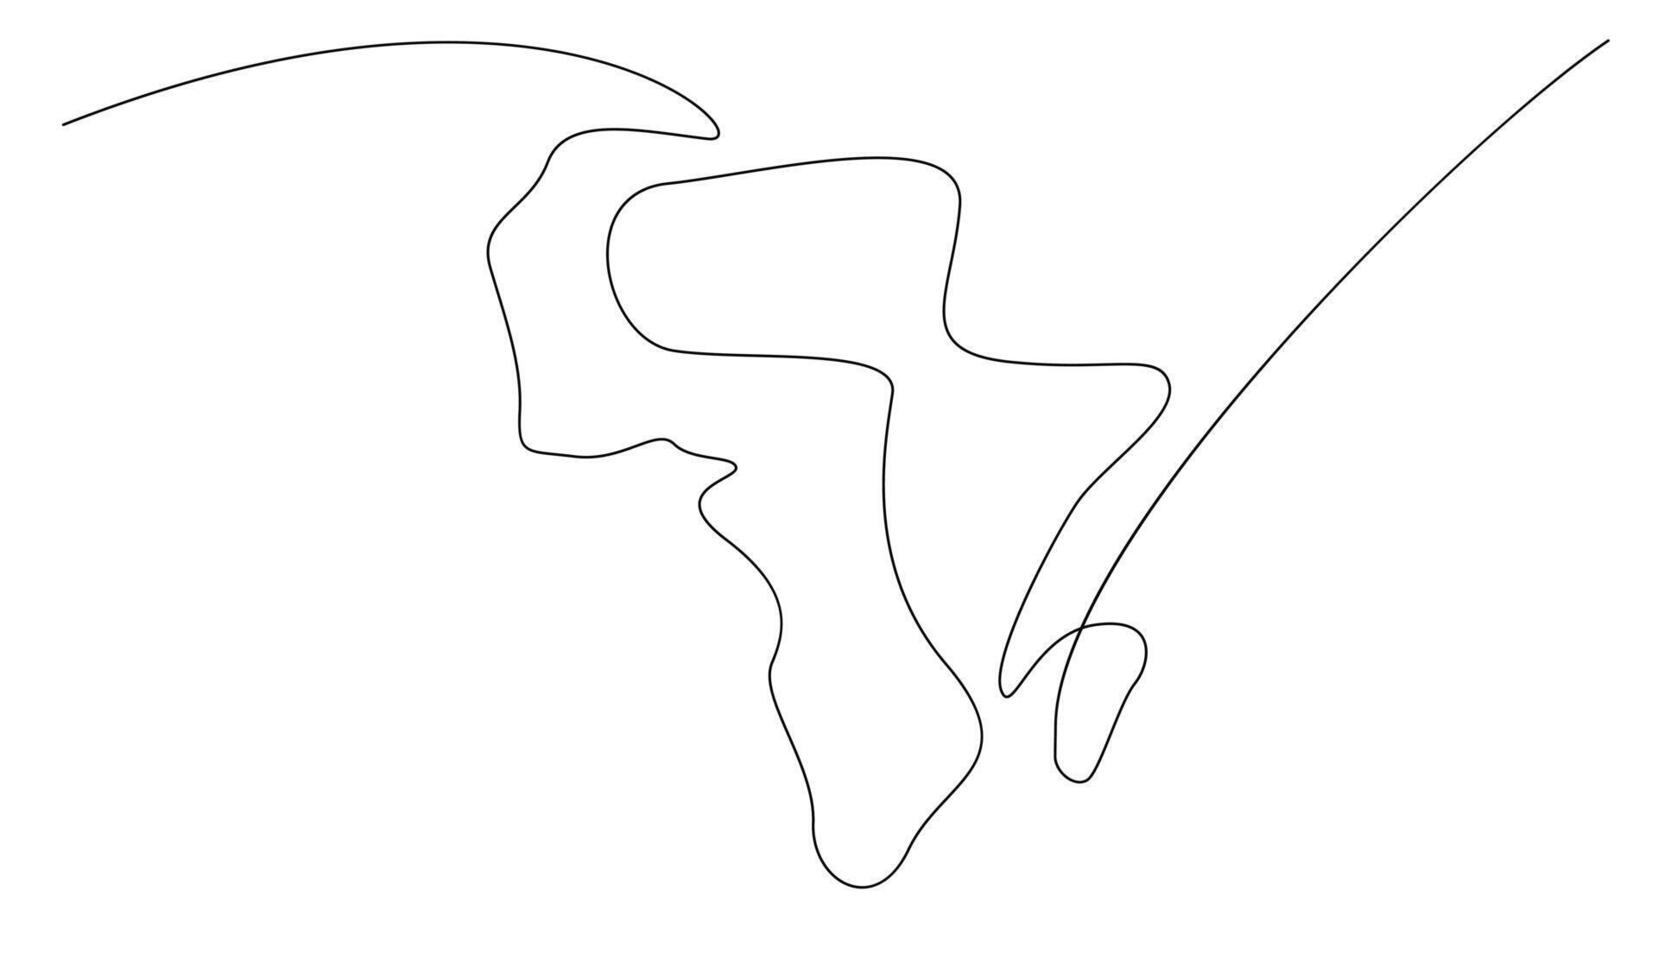 Single continuous line art map of Africa vector